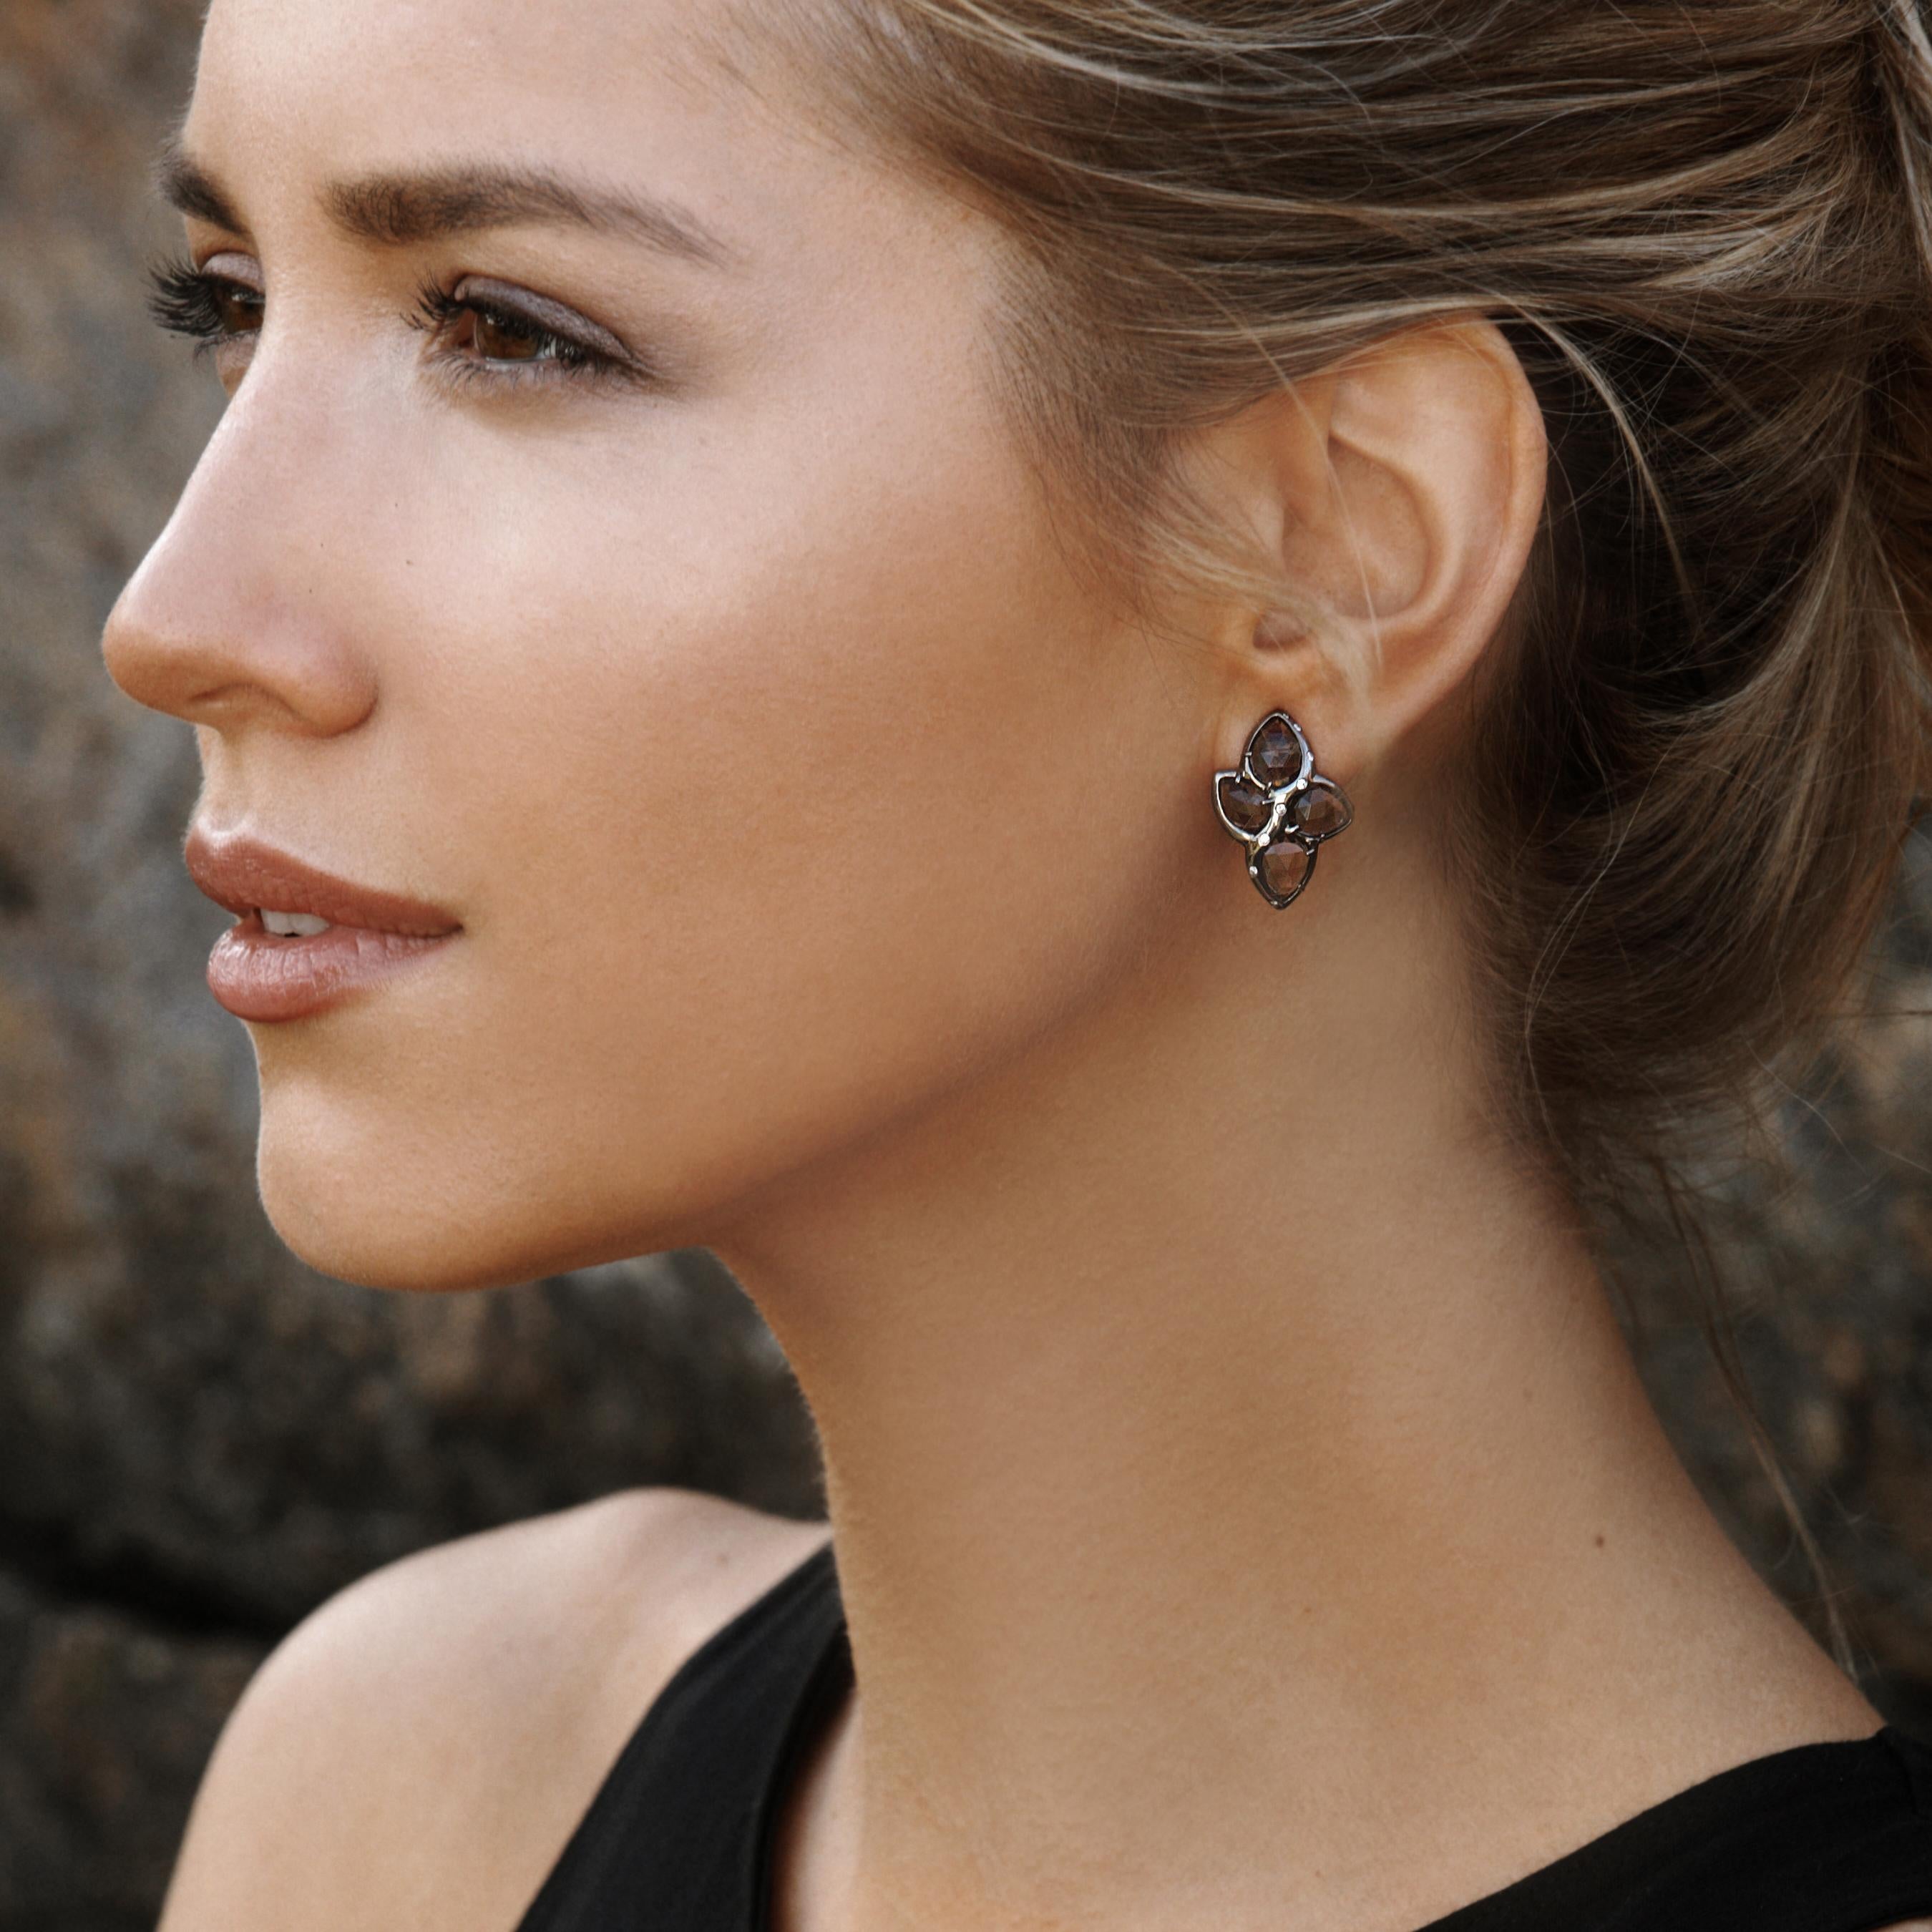 Luminous earrings that are sculpted and contoured to rest gracefully on each ear as they radiate rich earthy tones. This sterling silver 